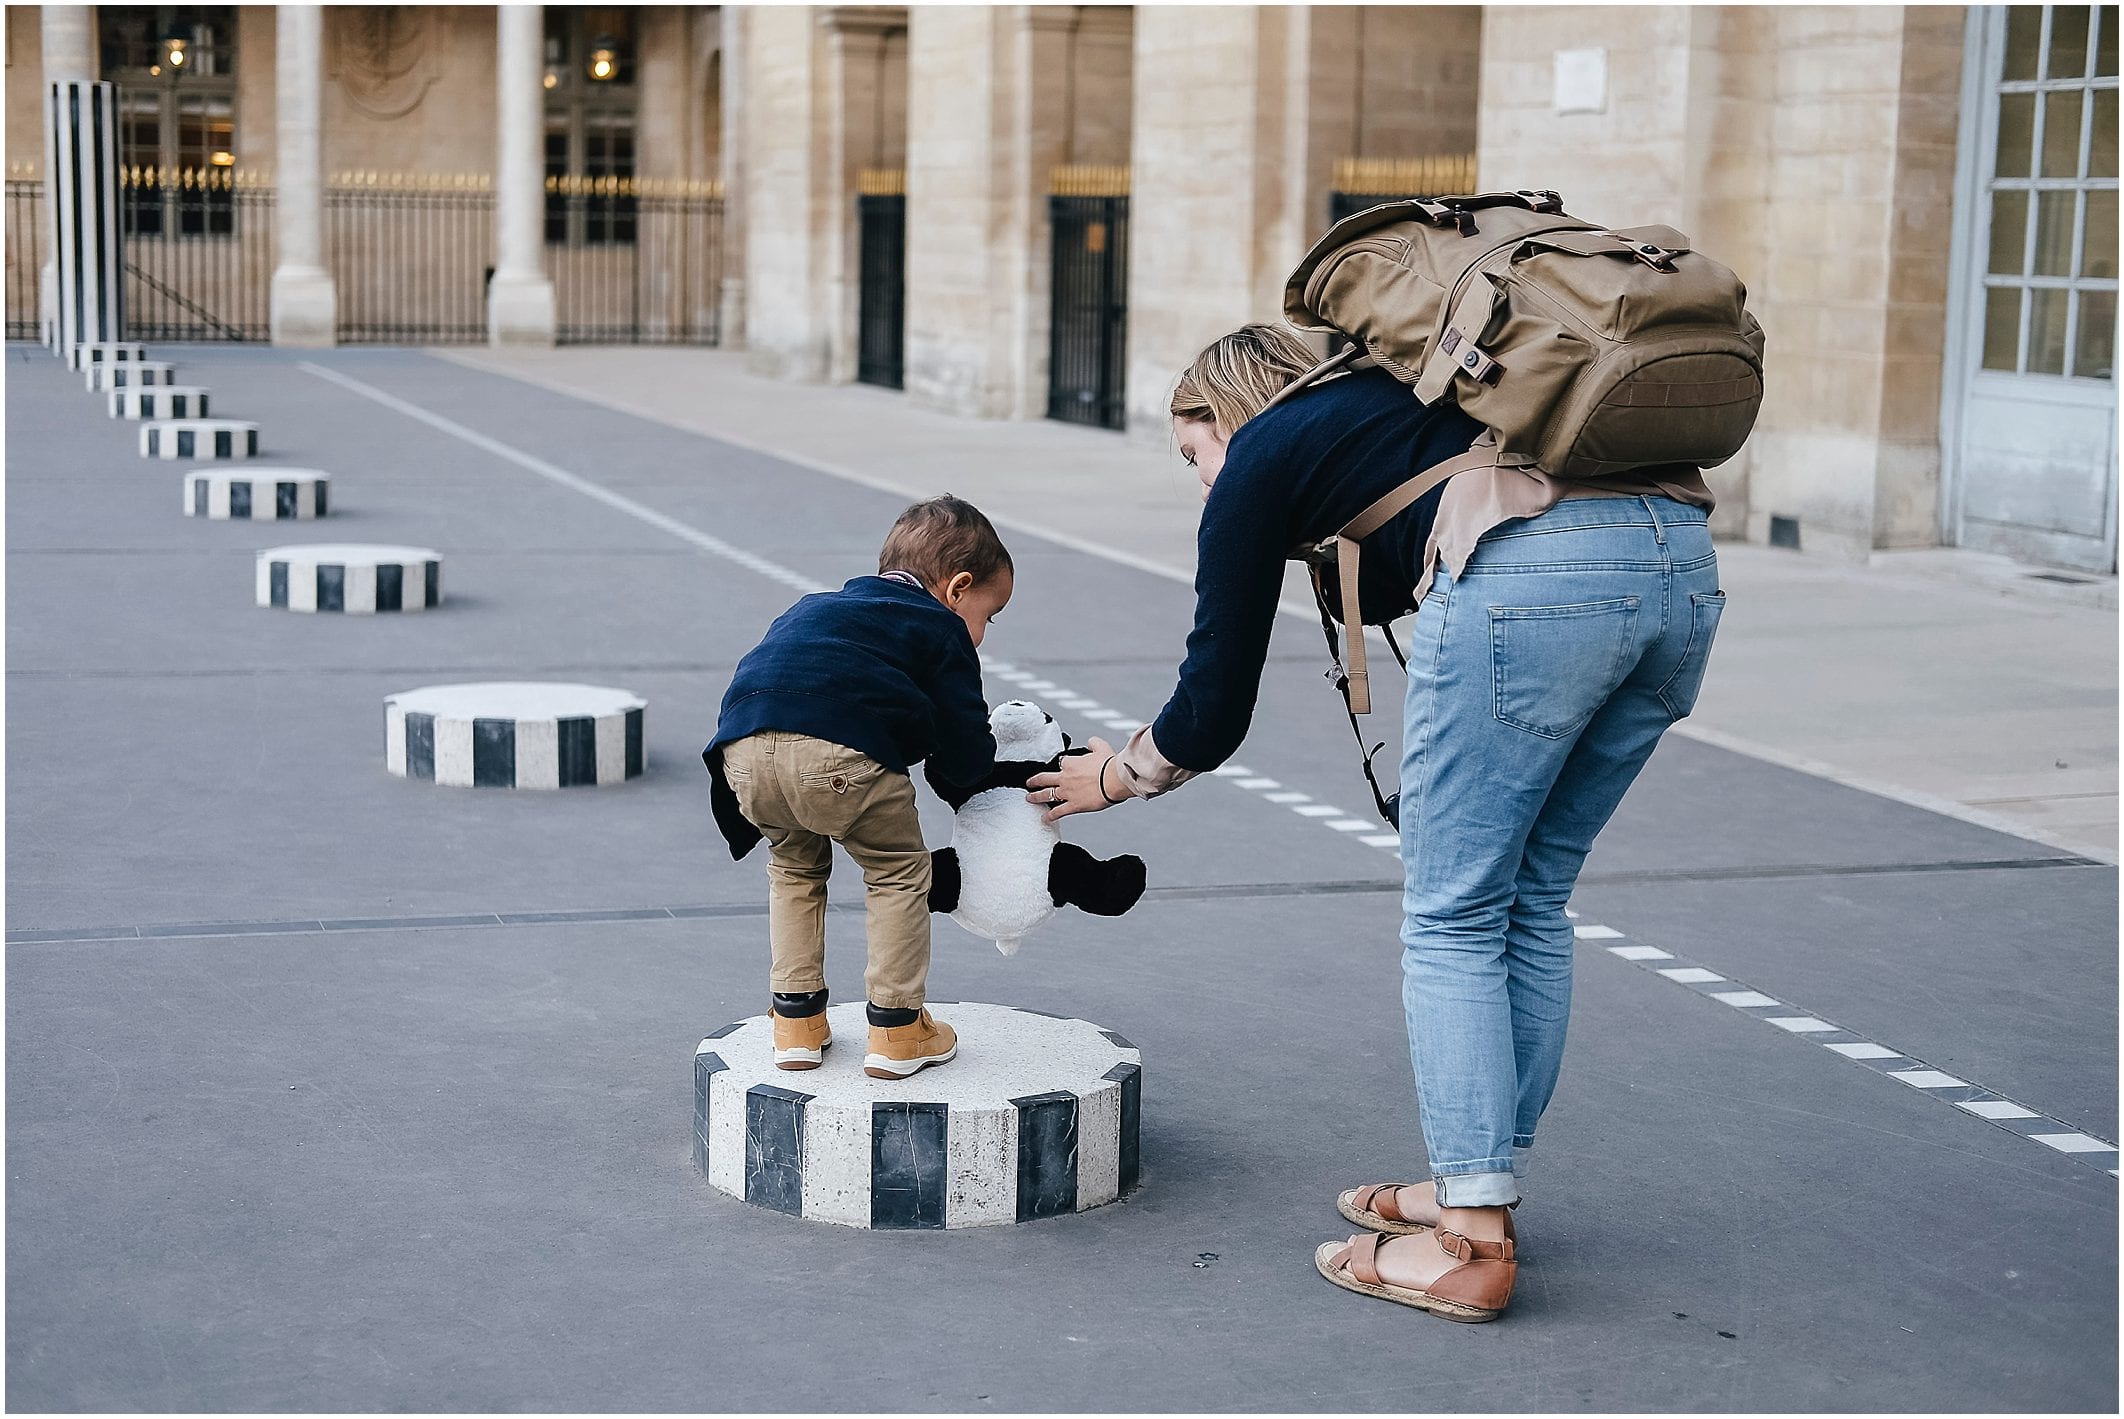 France Family Children Photographer, Helena Woods, blogs some behind the scenes from her paris photo shoot and why she is most inspired by children